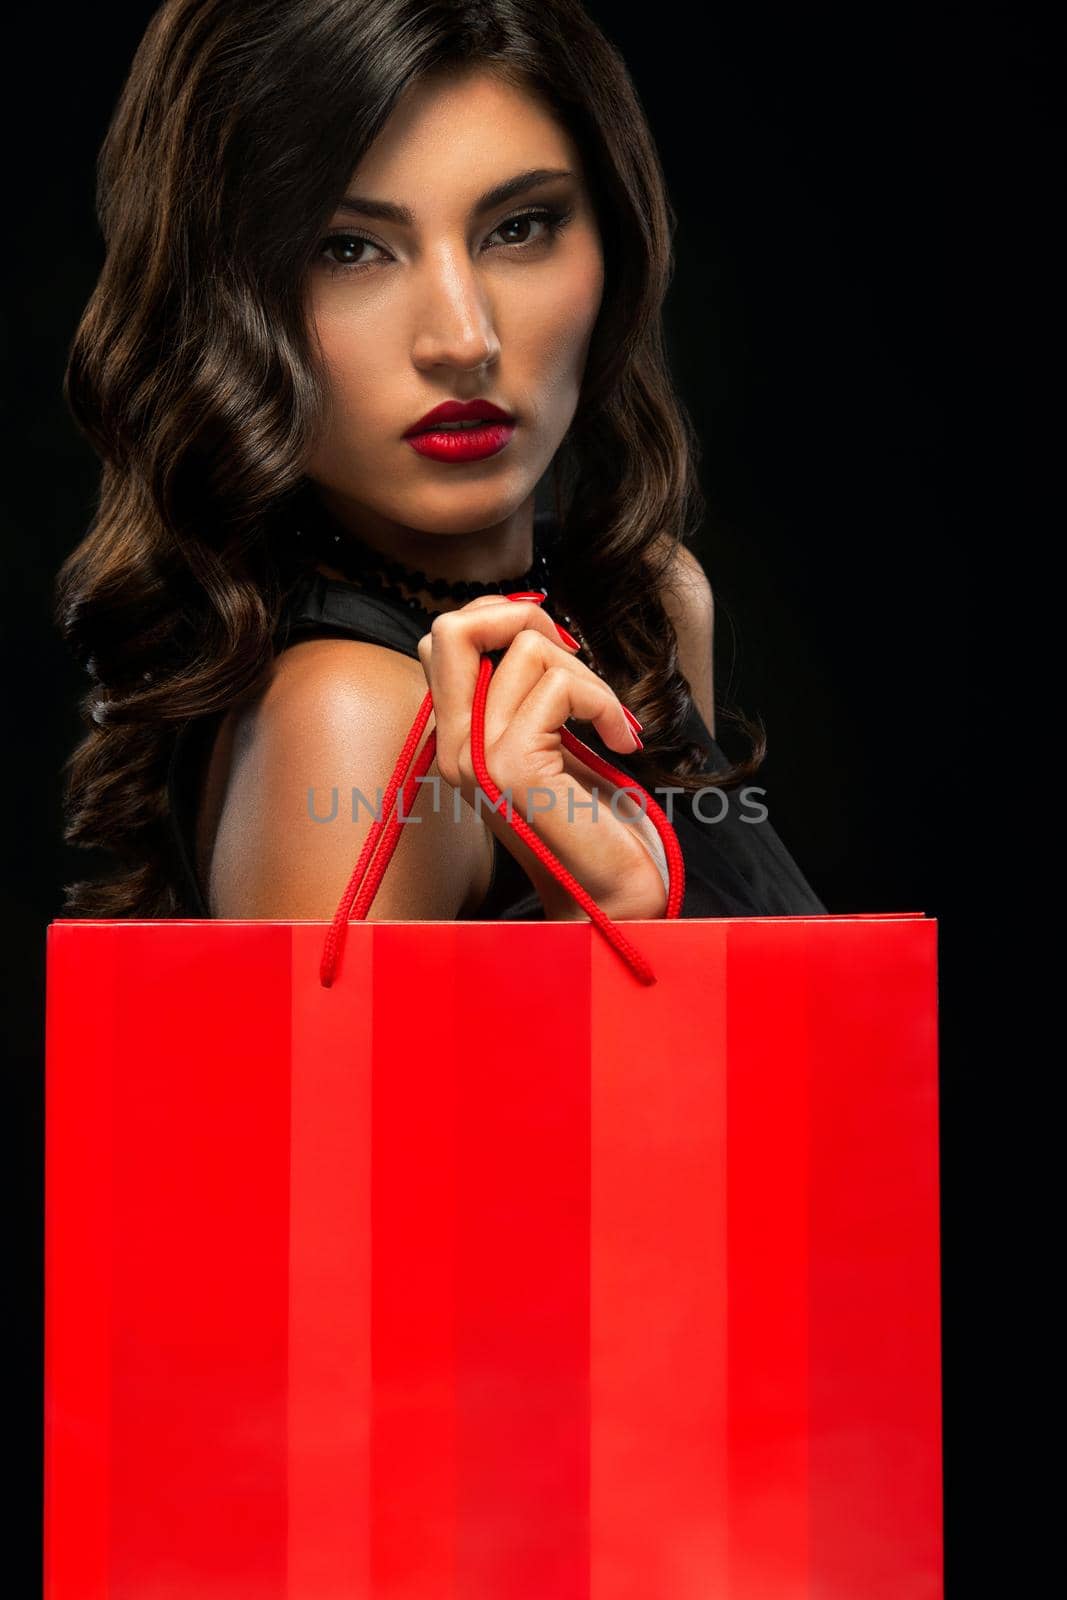 Black friday sale concept. Shopping woman holding red bag isolated on dark background in holiday by MikeOrlov